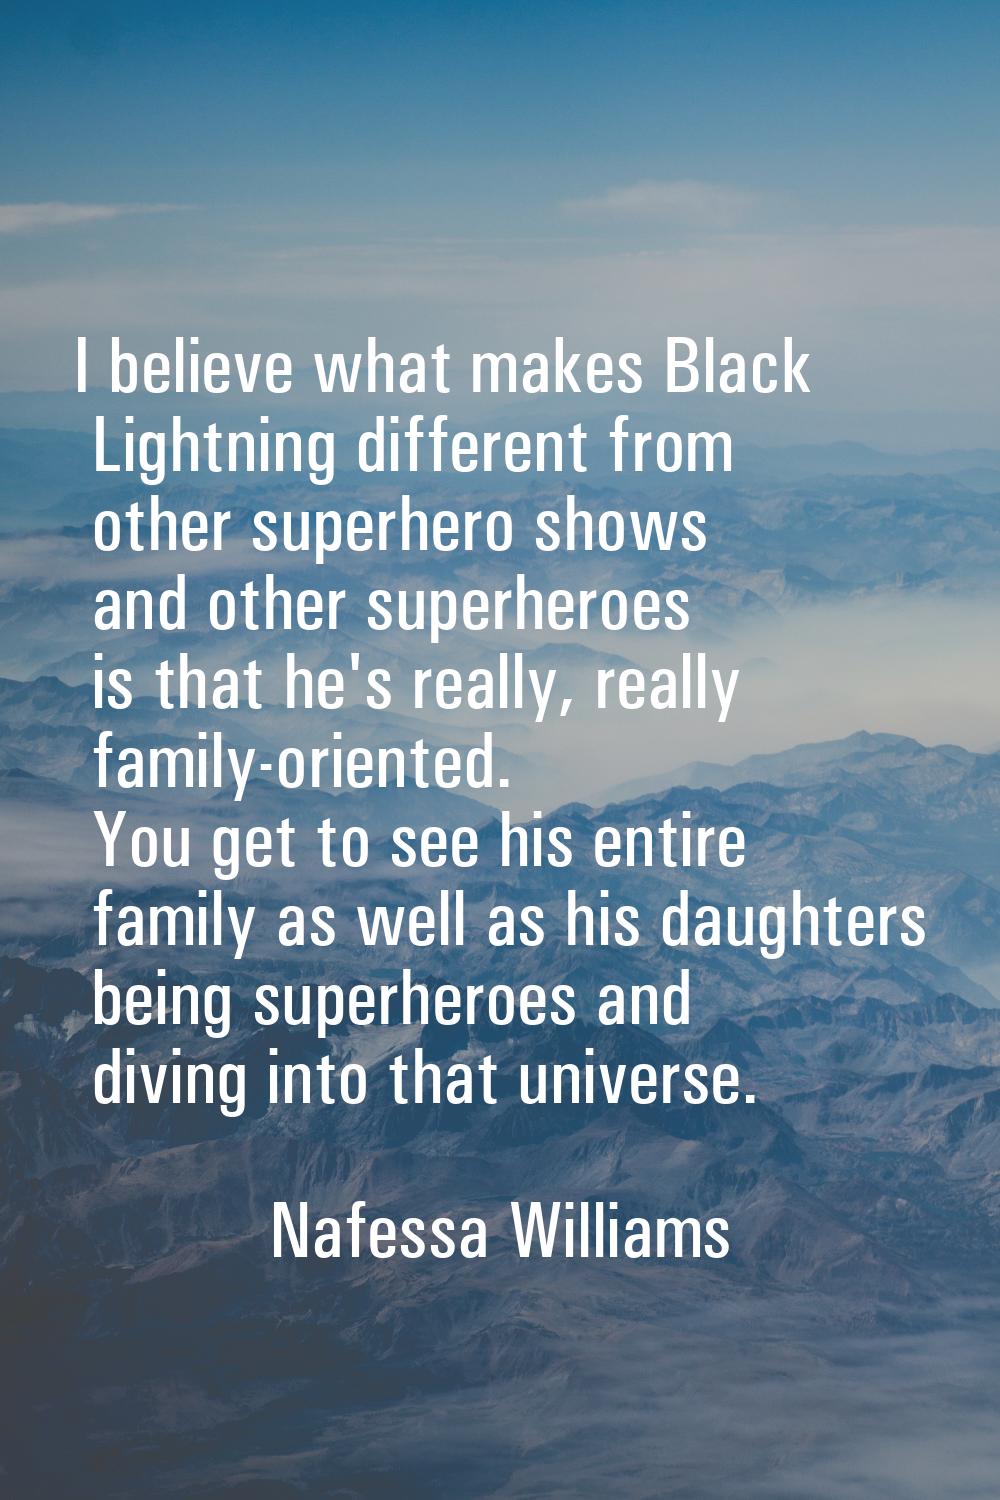 I believe what makes Black Lightning different from other superhero shows and other superheroes is 